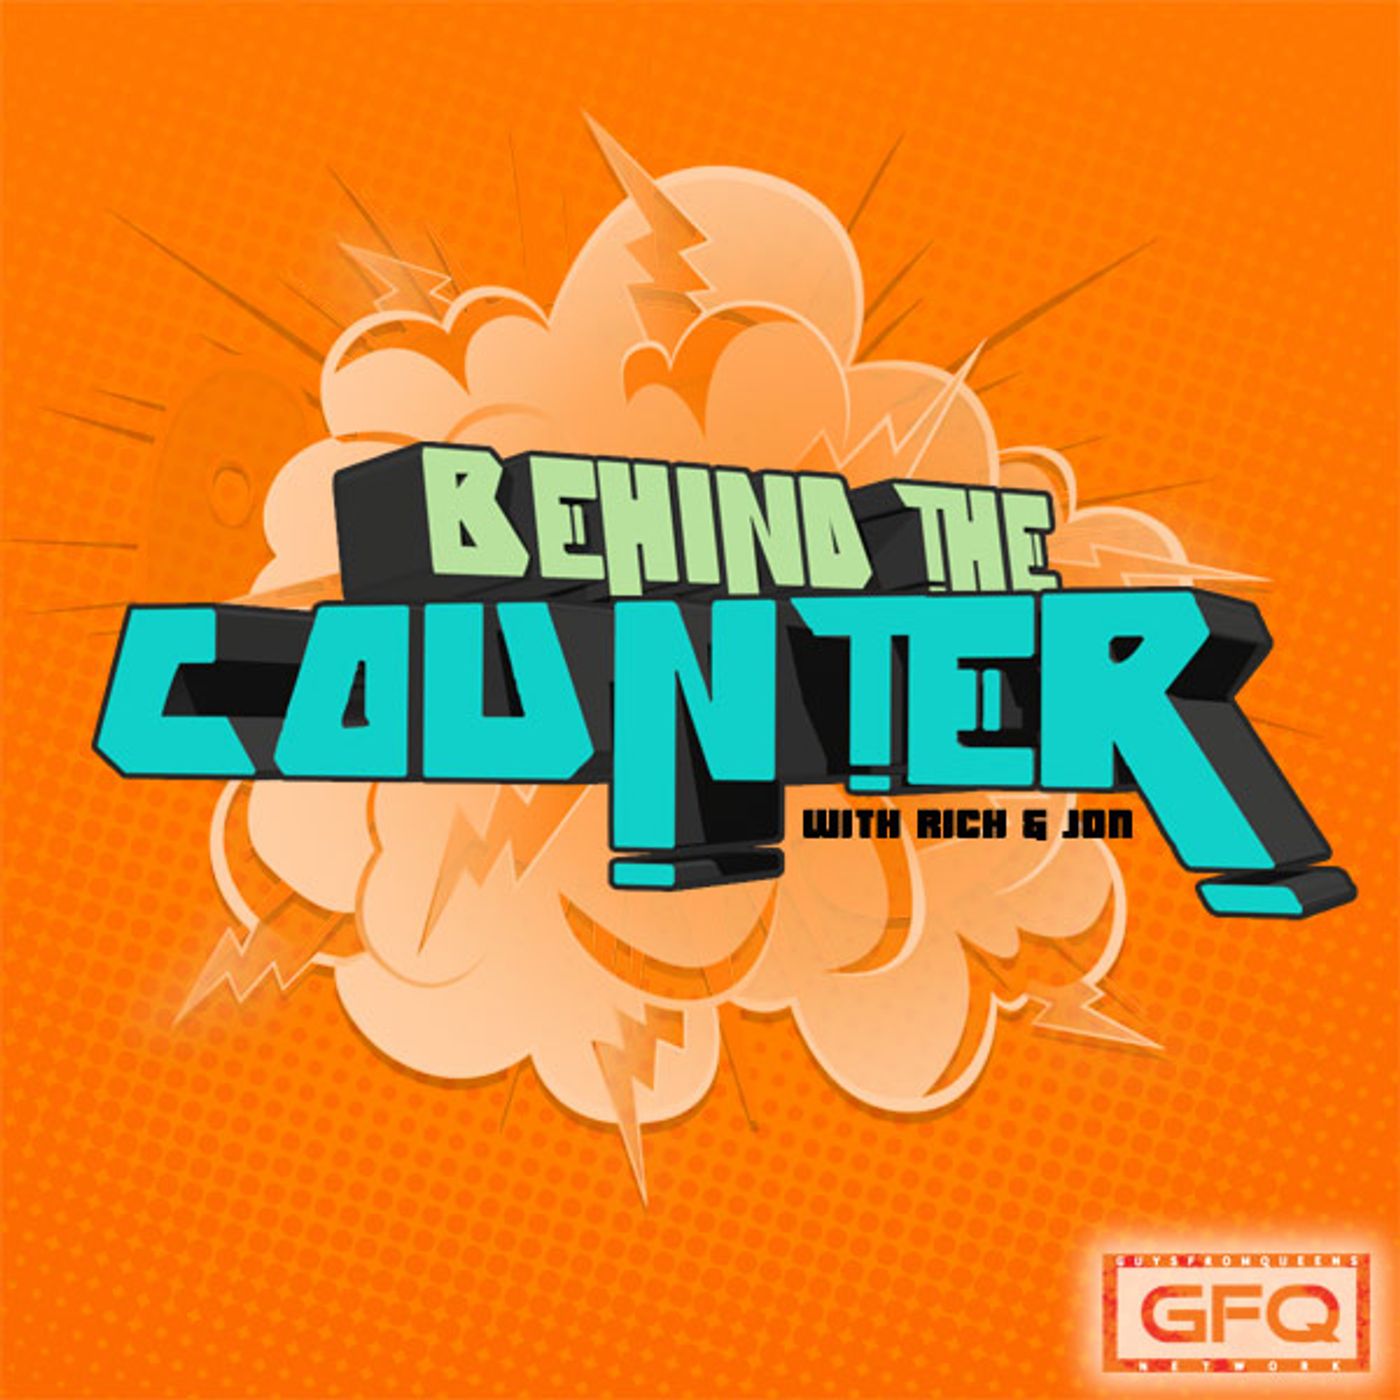 Behind The Counter Comics